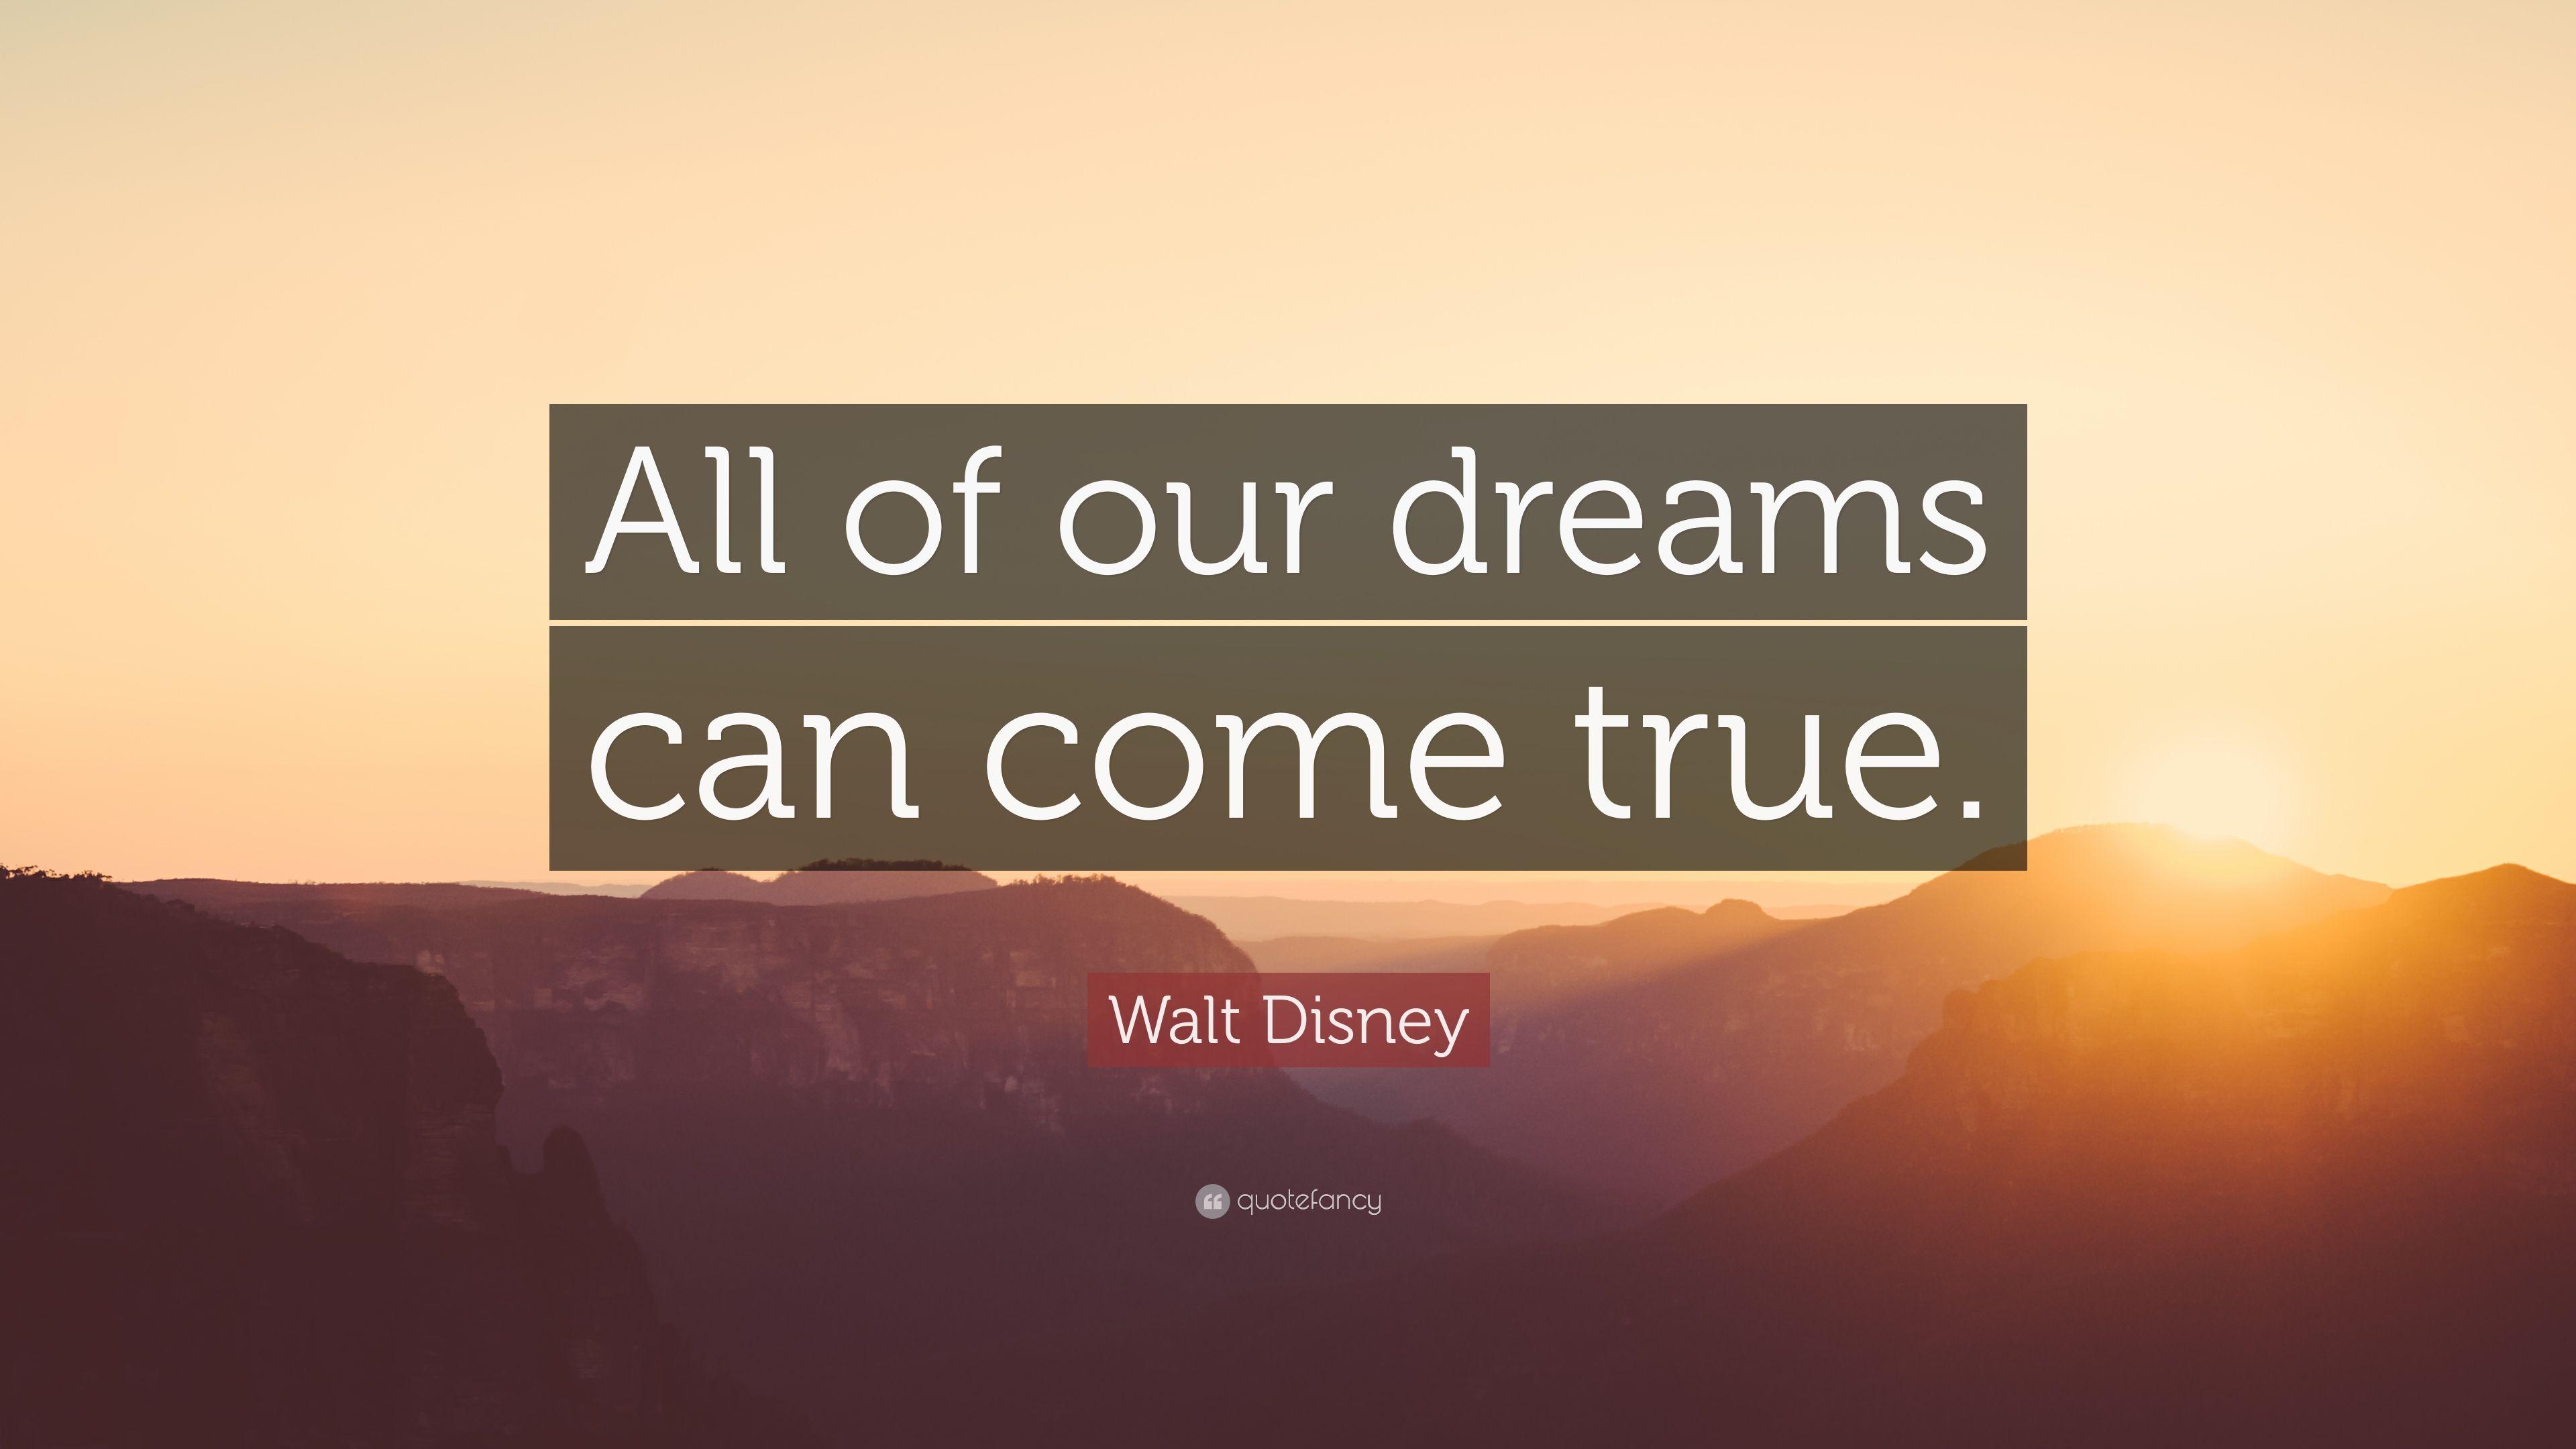 Walt Disney Quote: “All of our dreams can come true.” 21